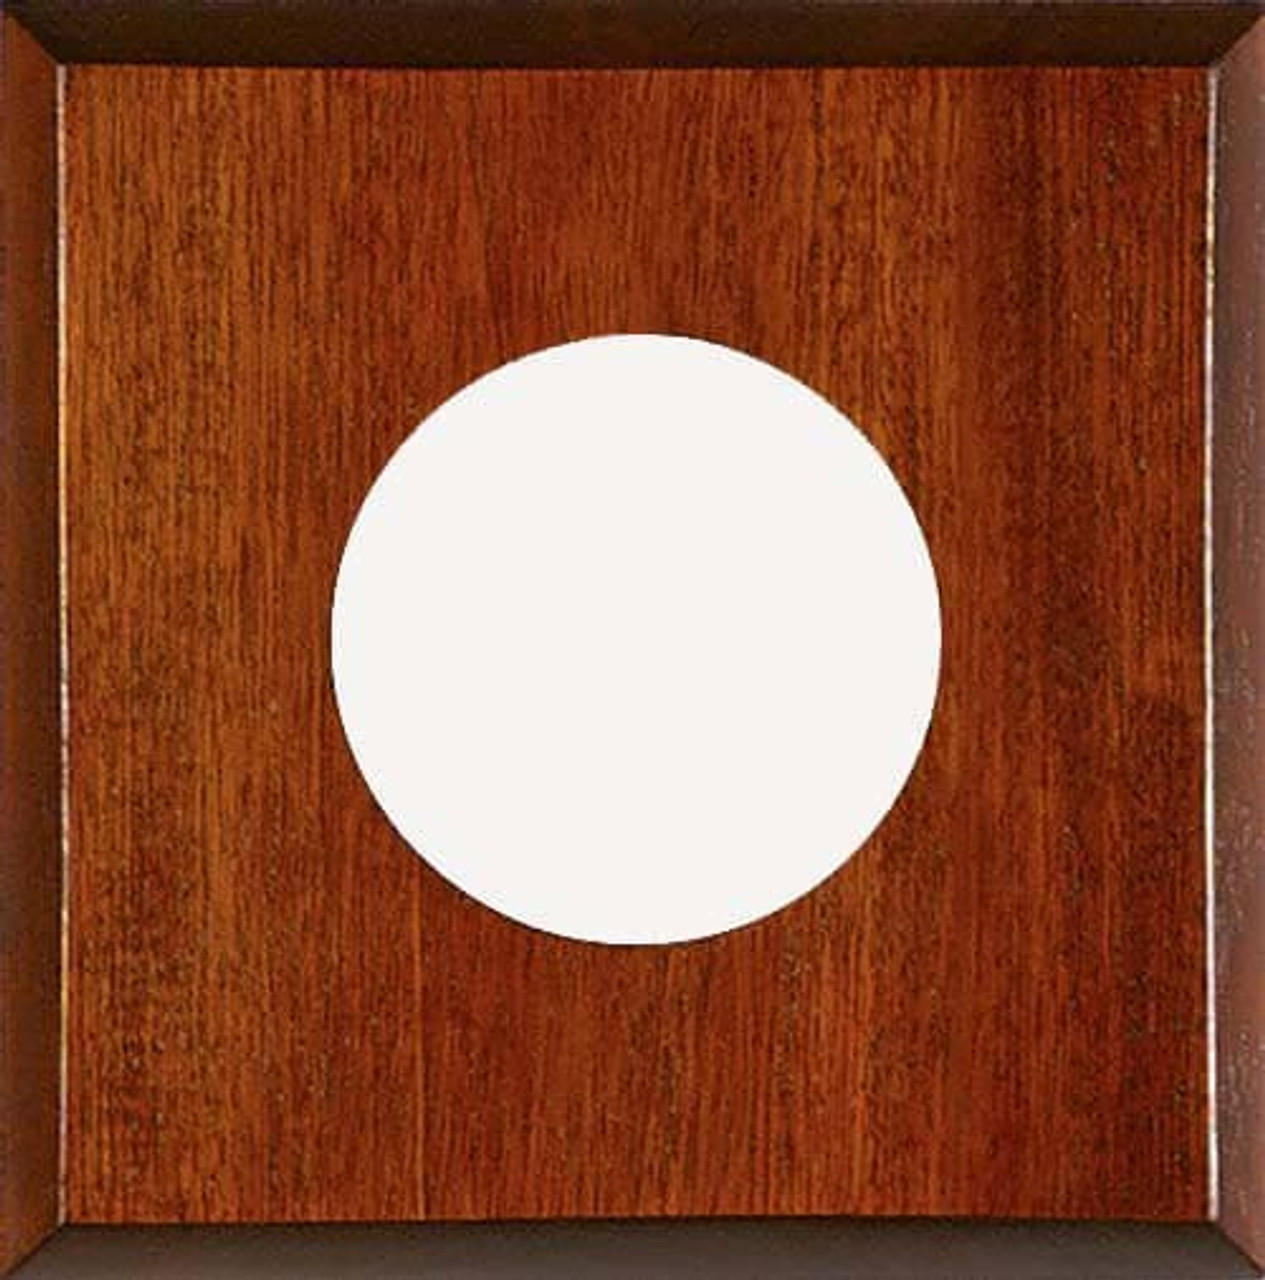 Mahogany Panel Mount for  Comfortminder Humidity and Thermometer Comfort Reading Instrument 